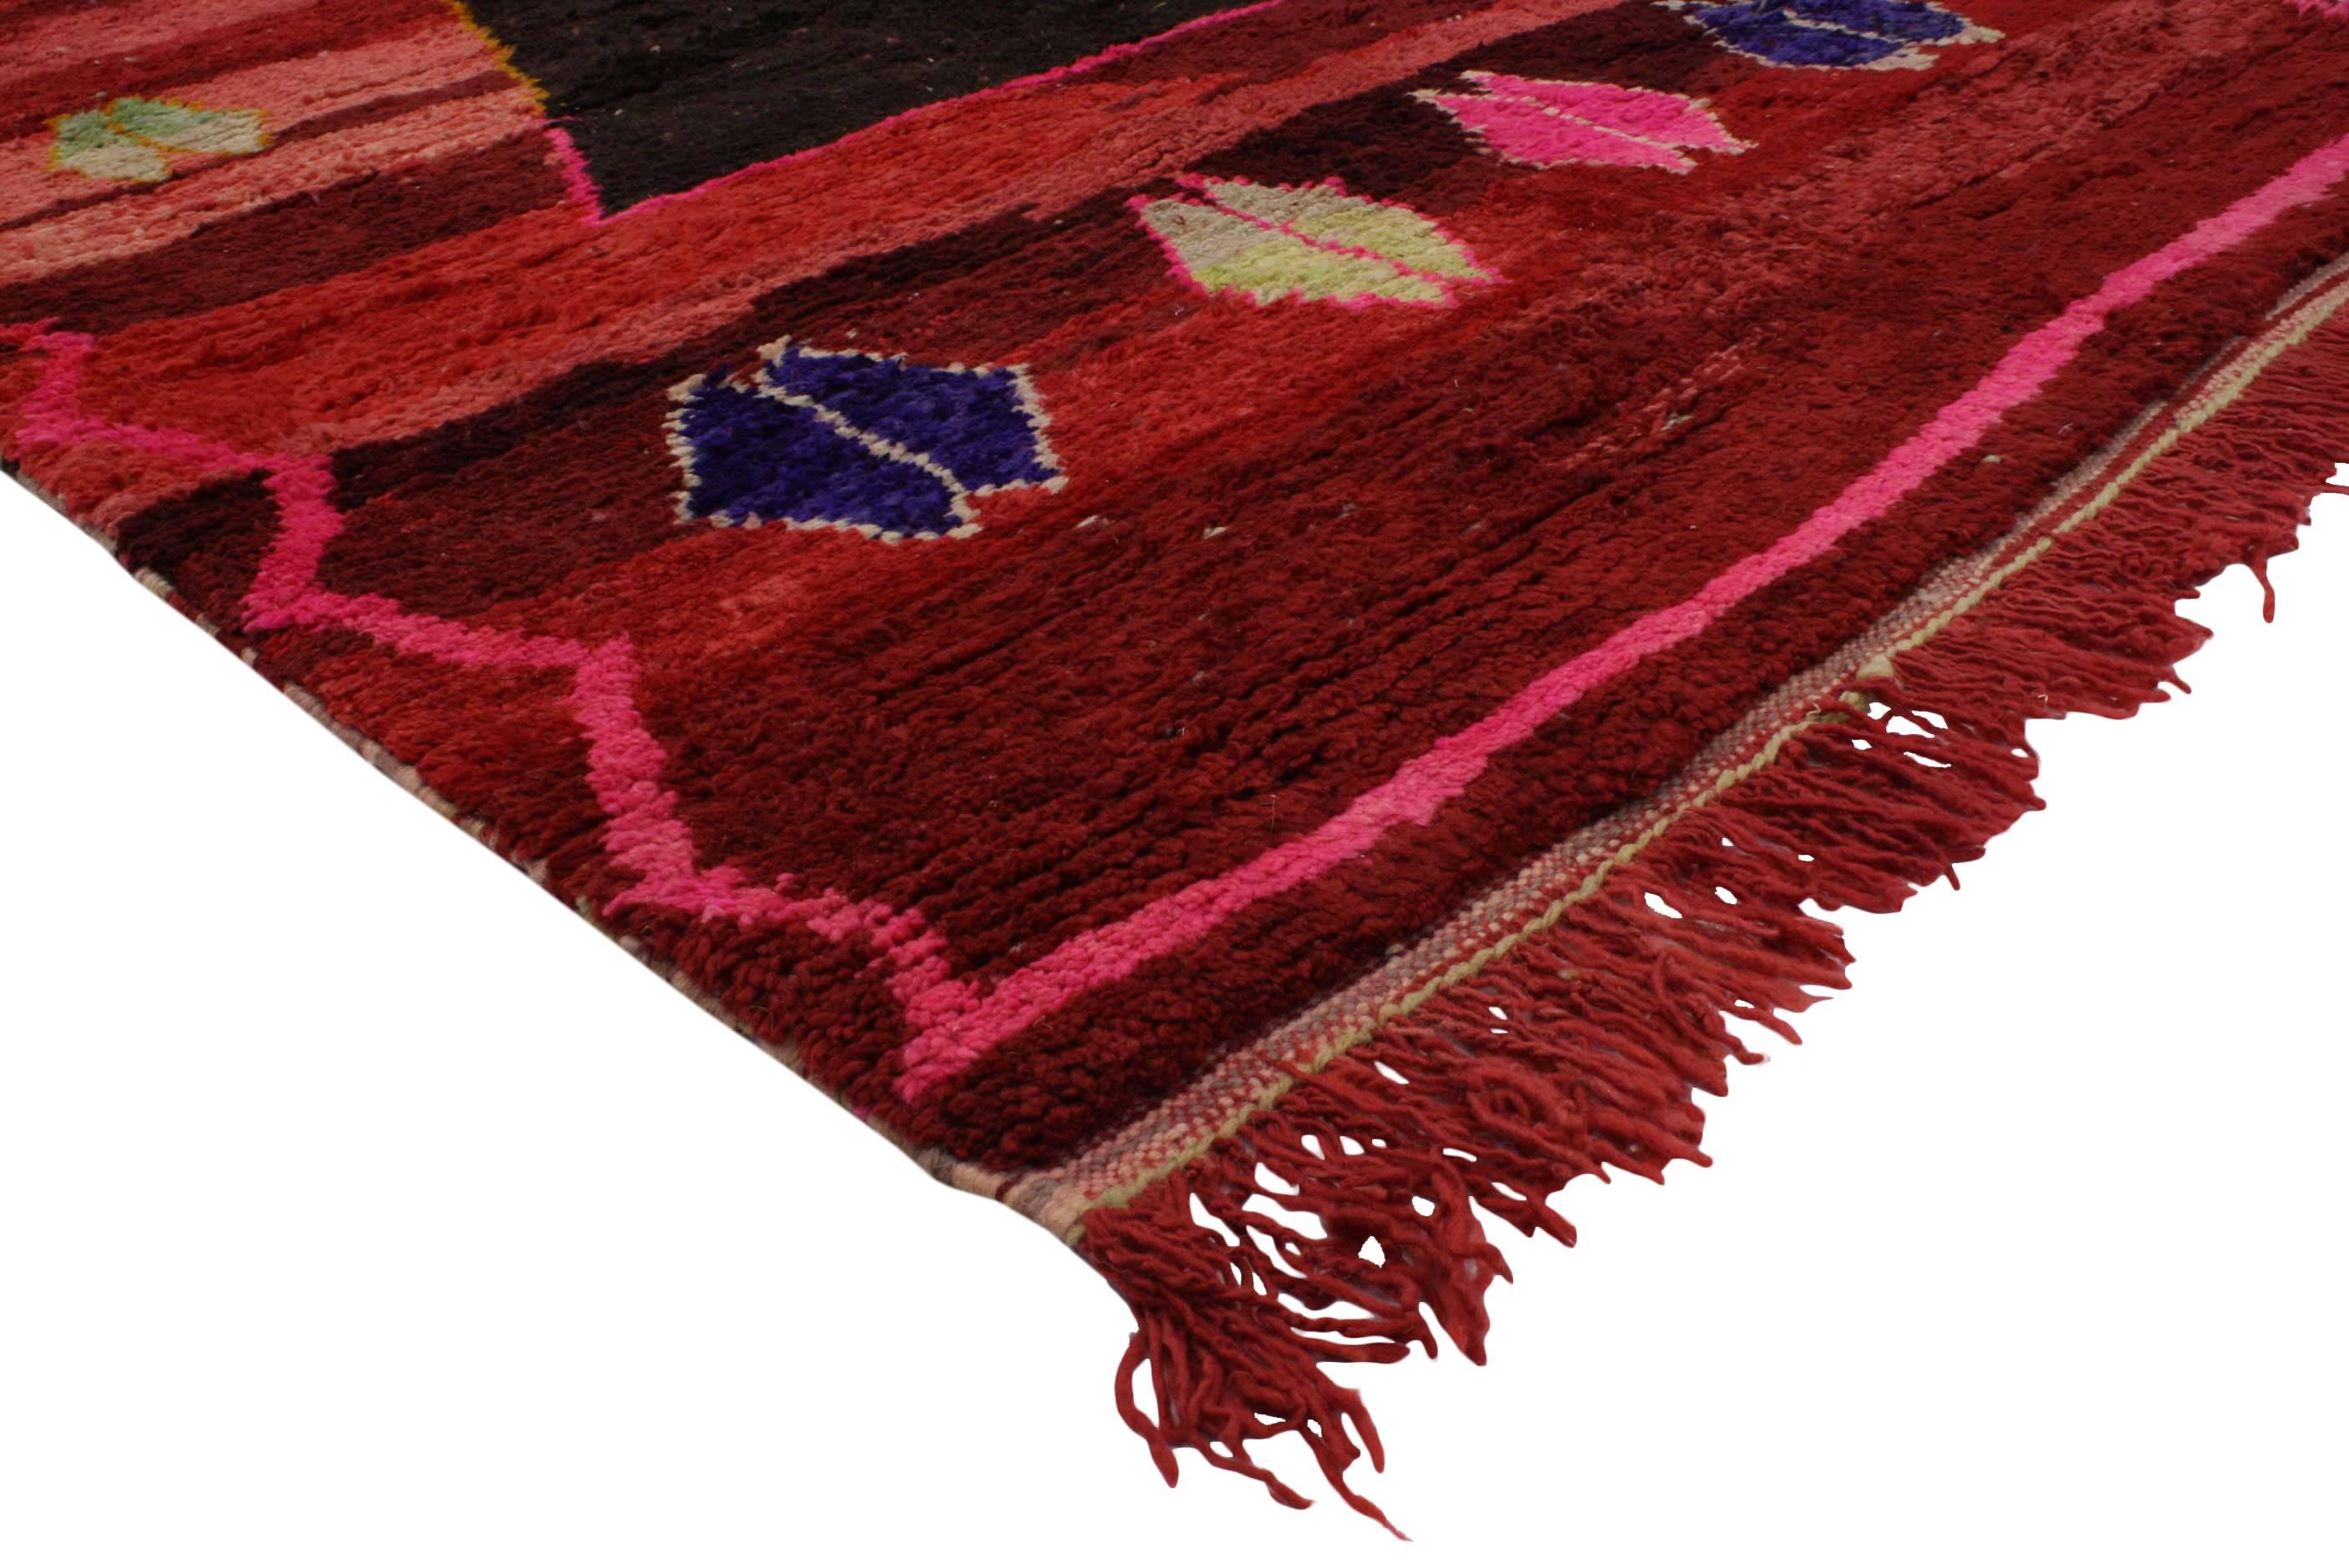 Highly stylish yet casually elegant, this boho chic Berber Moroccan rug with a contemporary abstract style is ideal for nearly any stylish space. Features a large black triangle surrounded by Berber Tribe motifs on an abrashed red field. This tribal